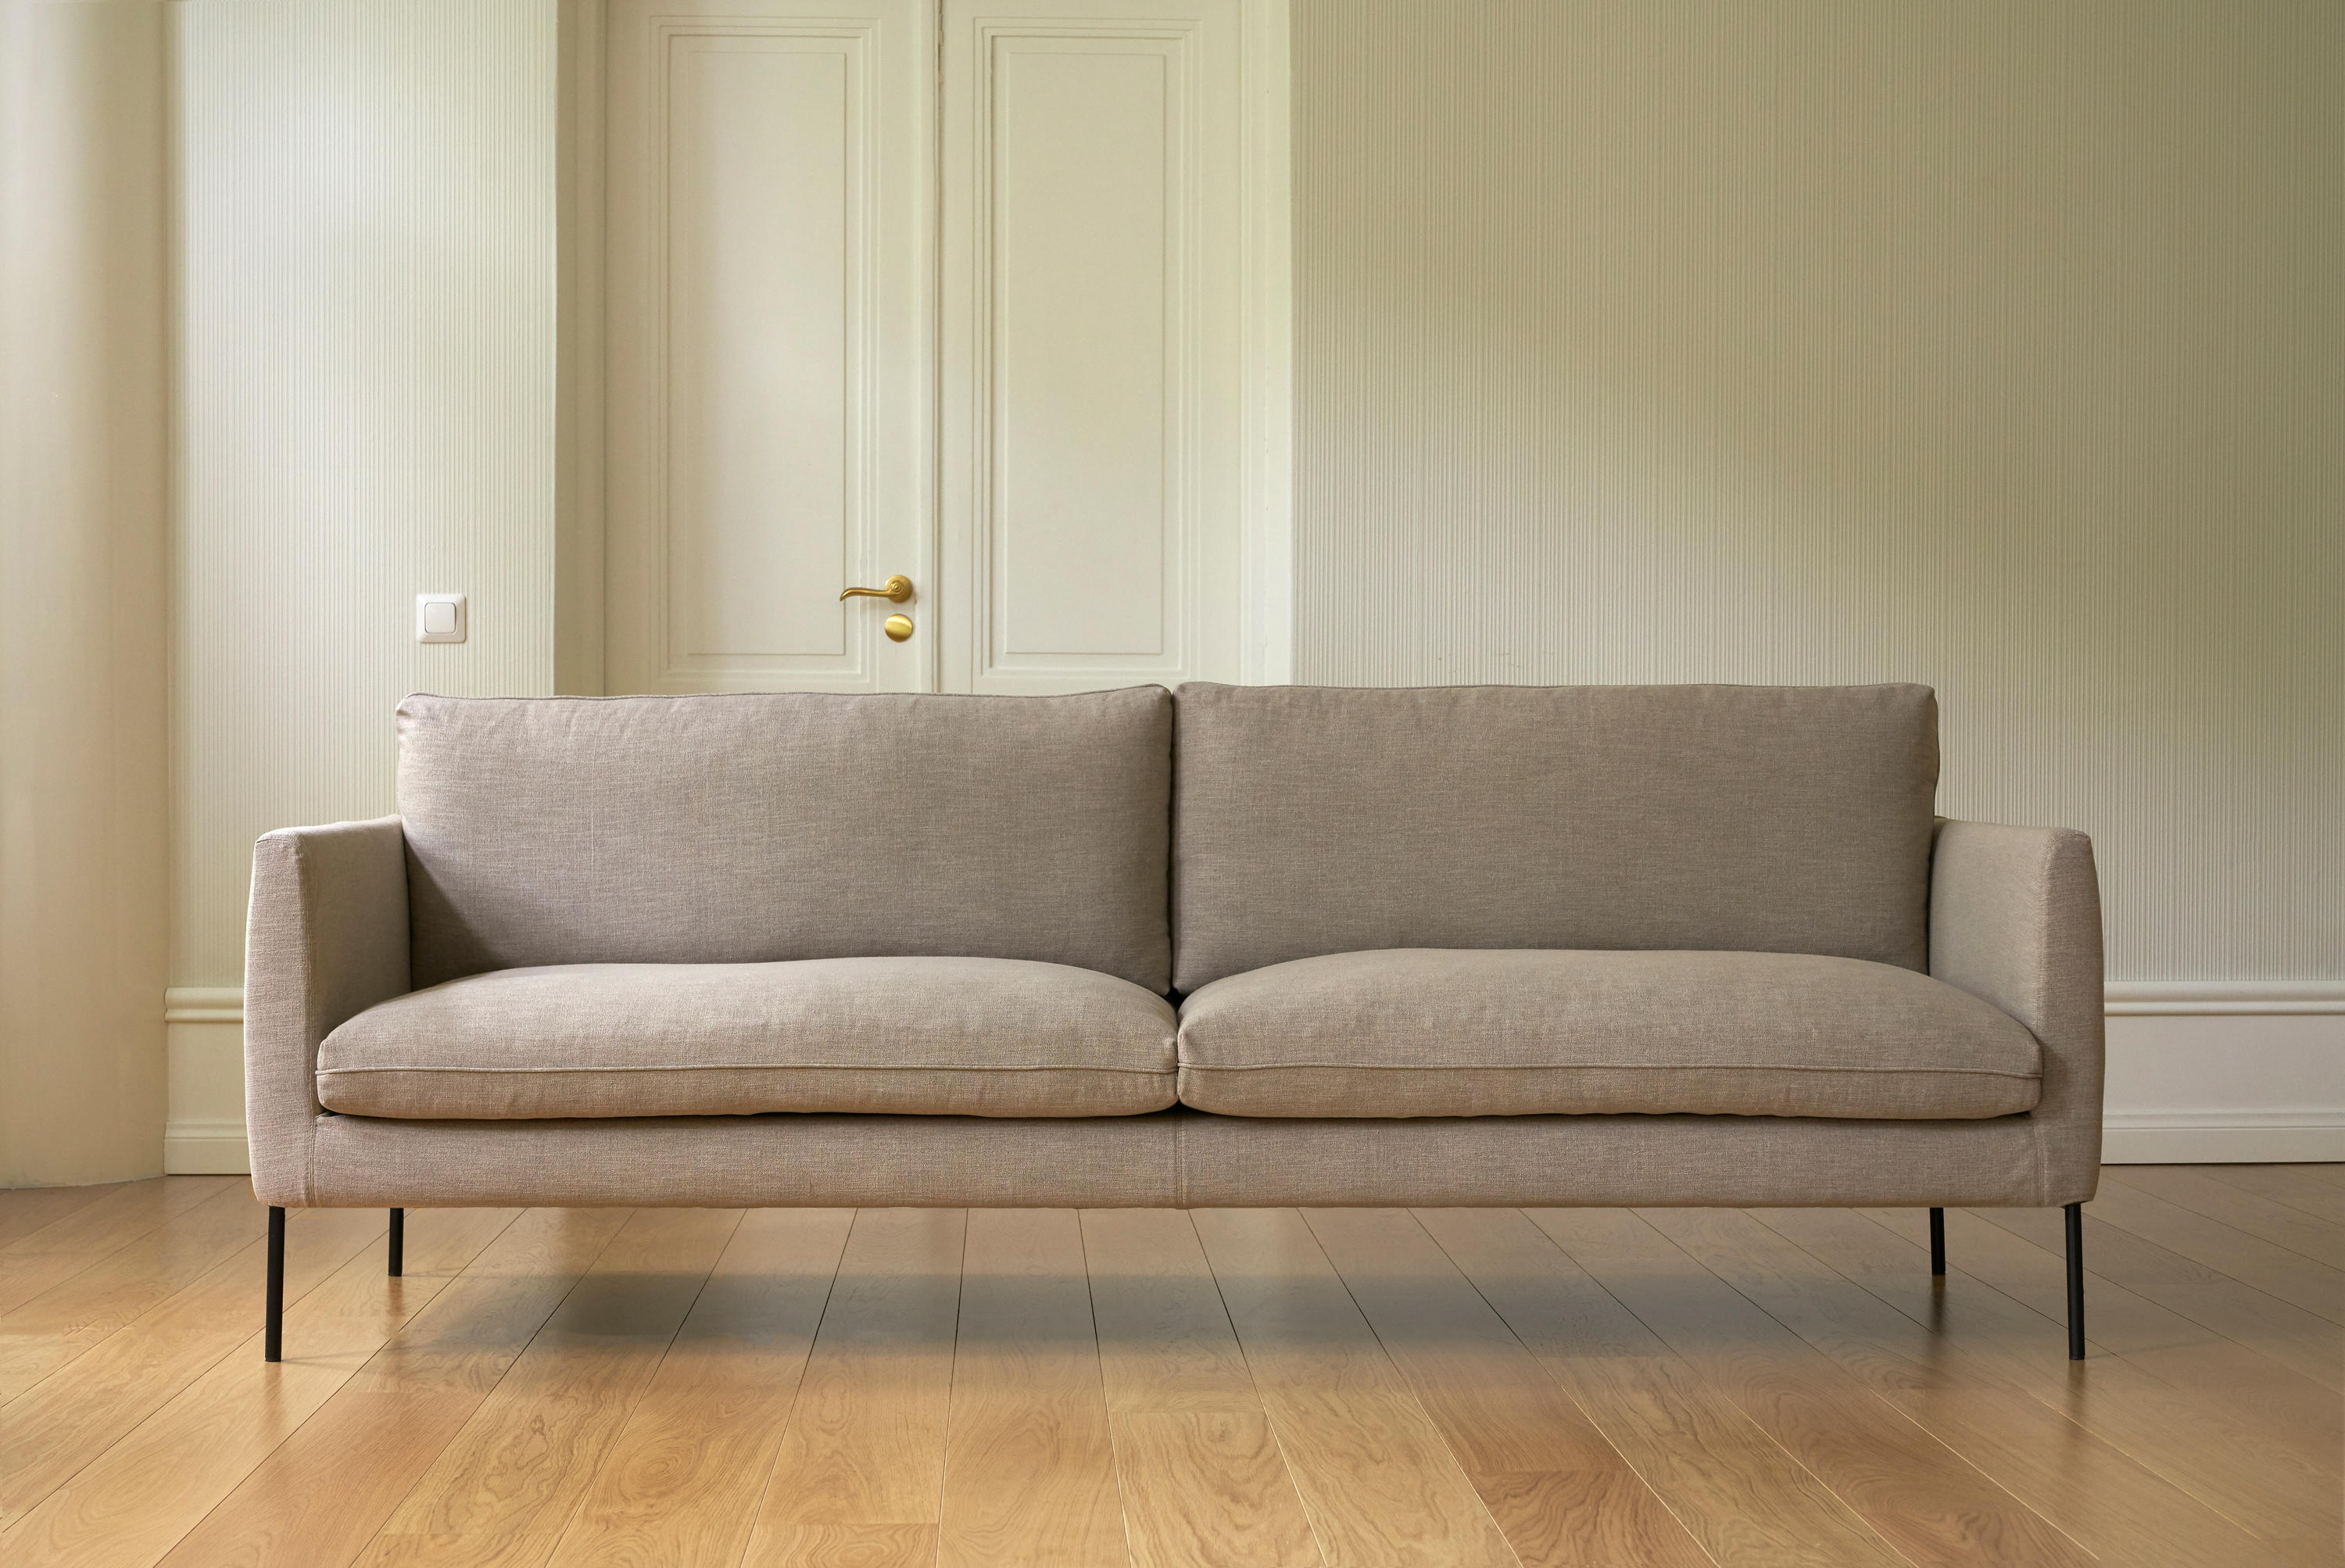 CURVE | SOFA - Sofas from Isku | Architonic